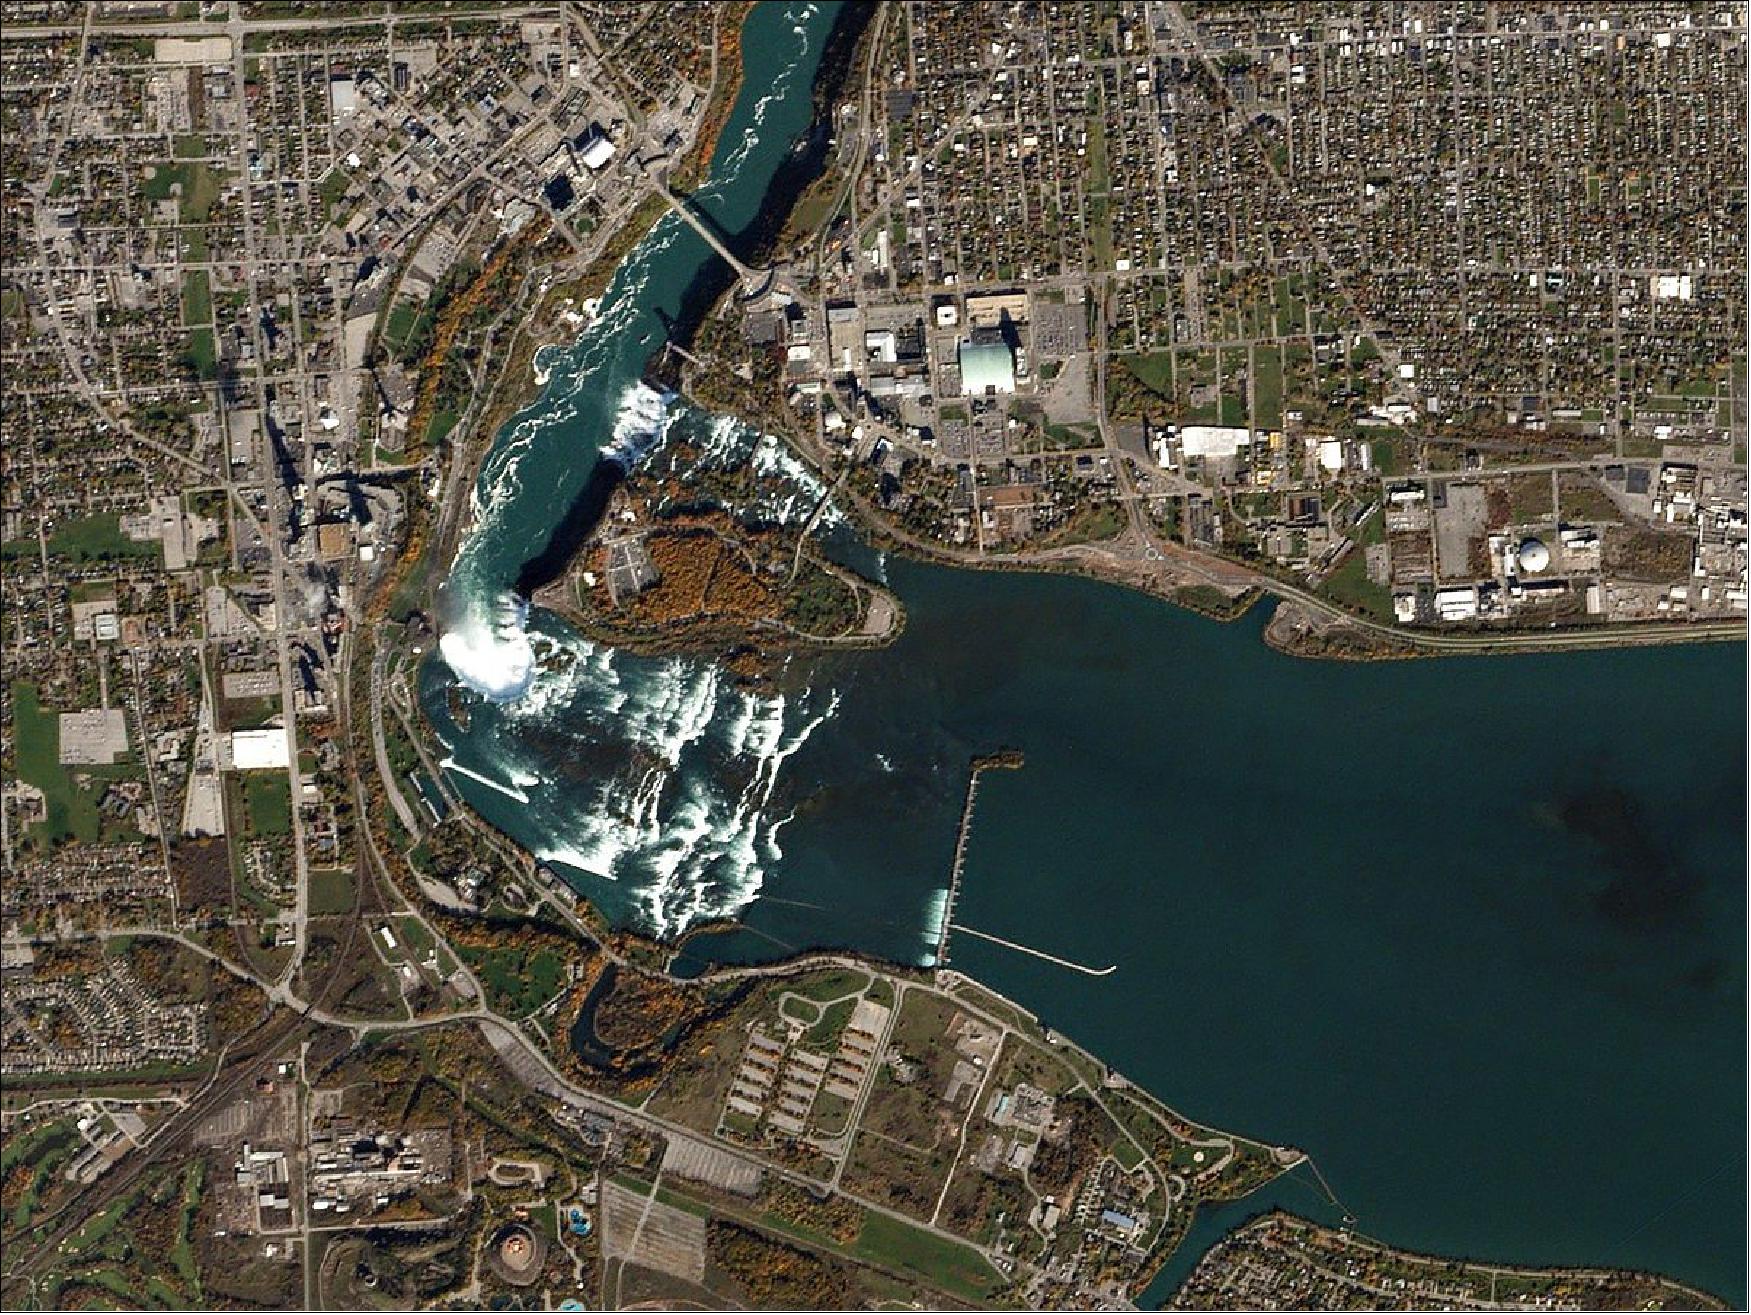 Figure 44: The Flock 1 constellation acquired this image of Niagara Falls on 26 October 2015. — Niagara Falls is a 12,000-year-old relic of the last Ice Age. Since then, the falls have moved more than 6 miles upstream from their original location near Lake Ontario.